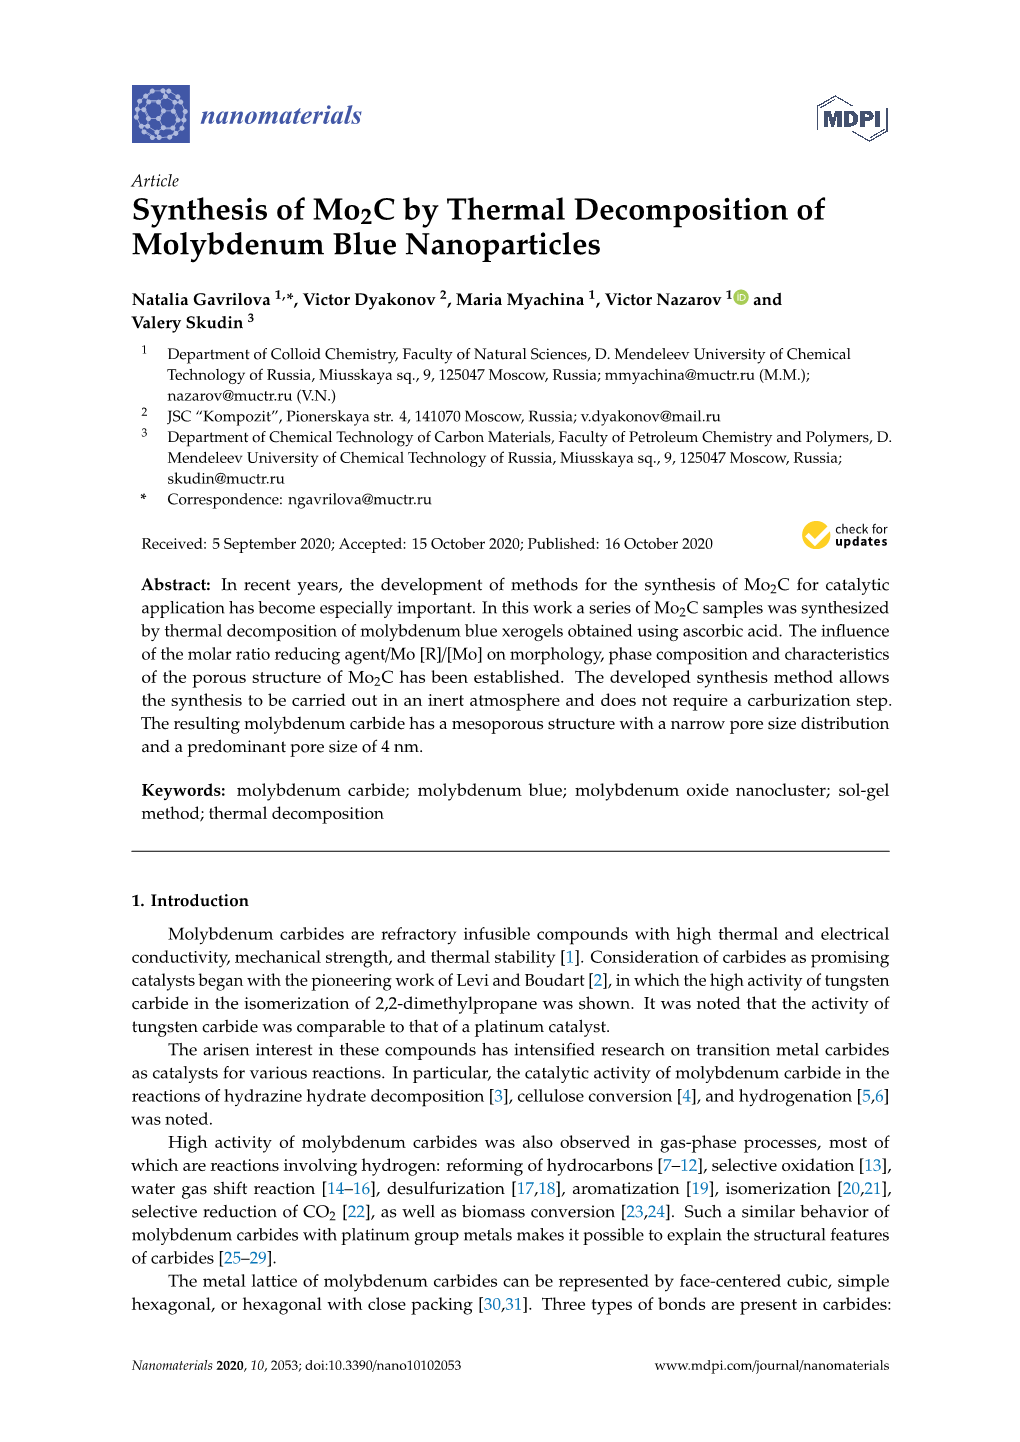 Synthesis of Mo2c by Thermal Decomposition of Molybdenum Blue Nanoparticles